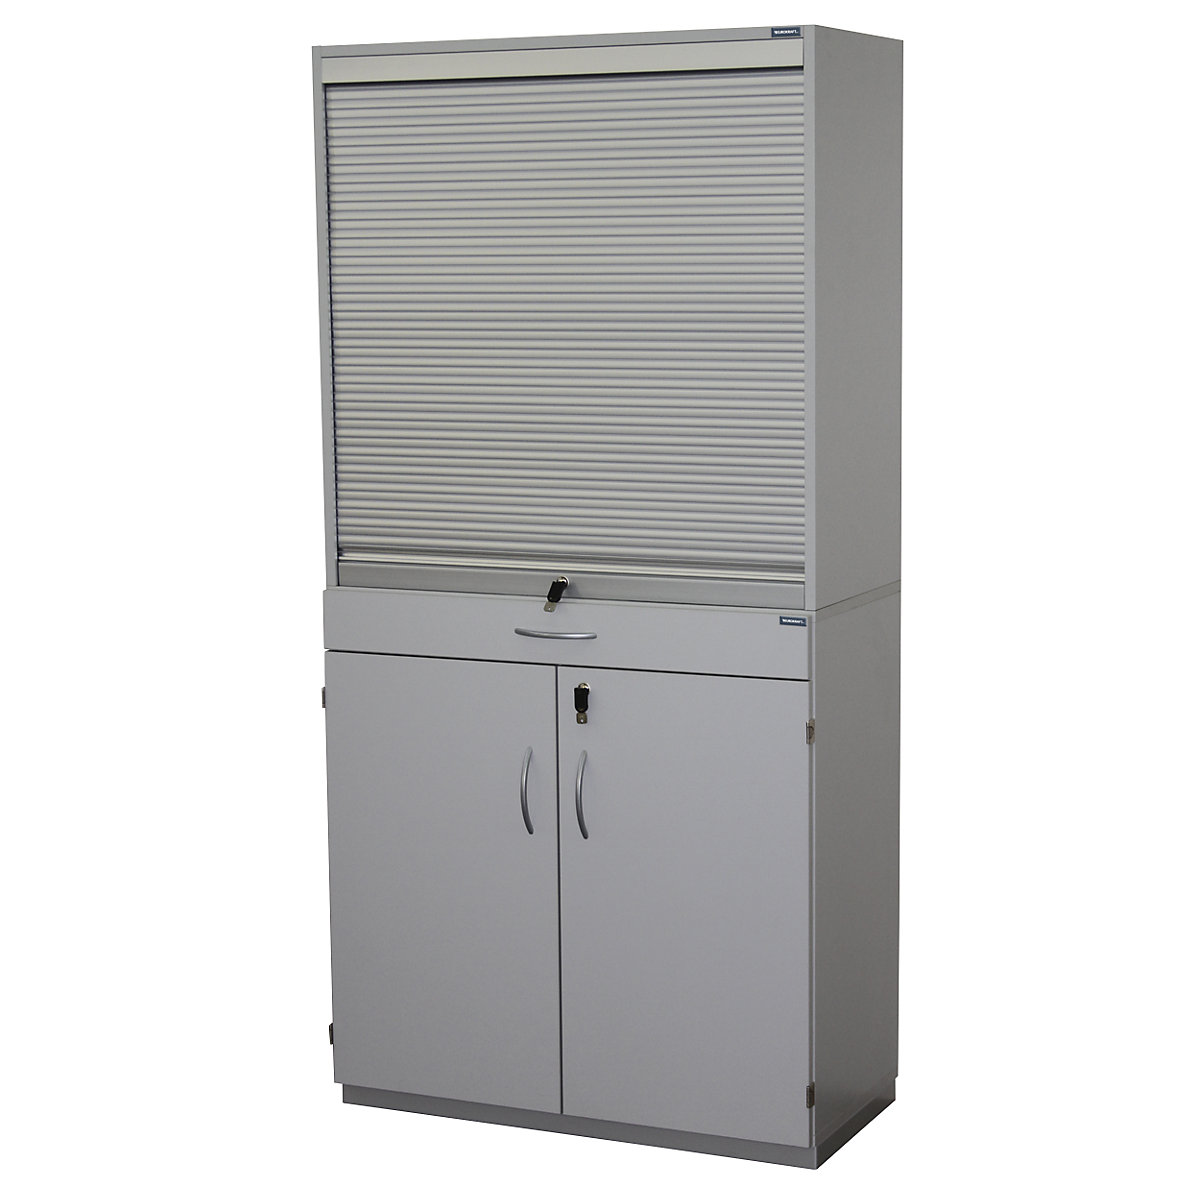 Sorting cupboard with roller shutter and add-on drawer unit – eurokraft pro, HxWxD 1864 x 913 x 440 mm, 18 compartments, light grey RAL 7035-5